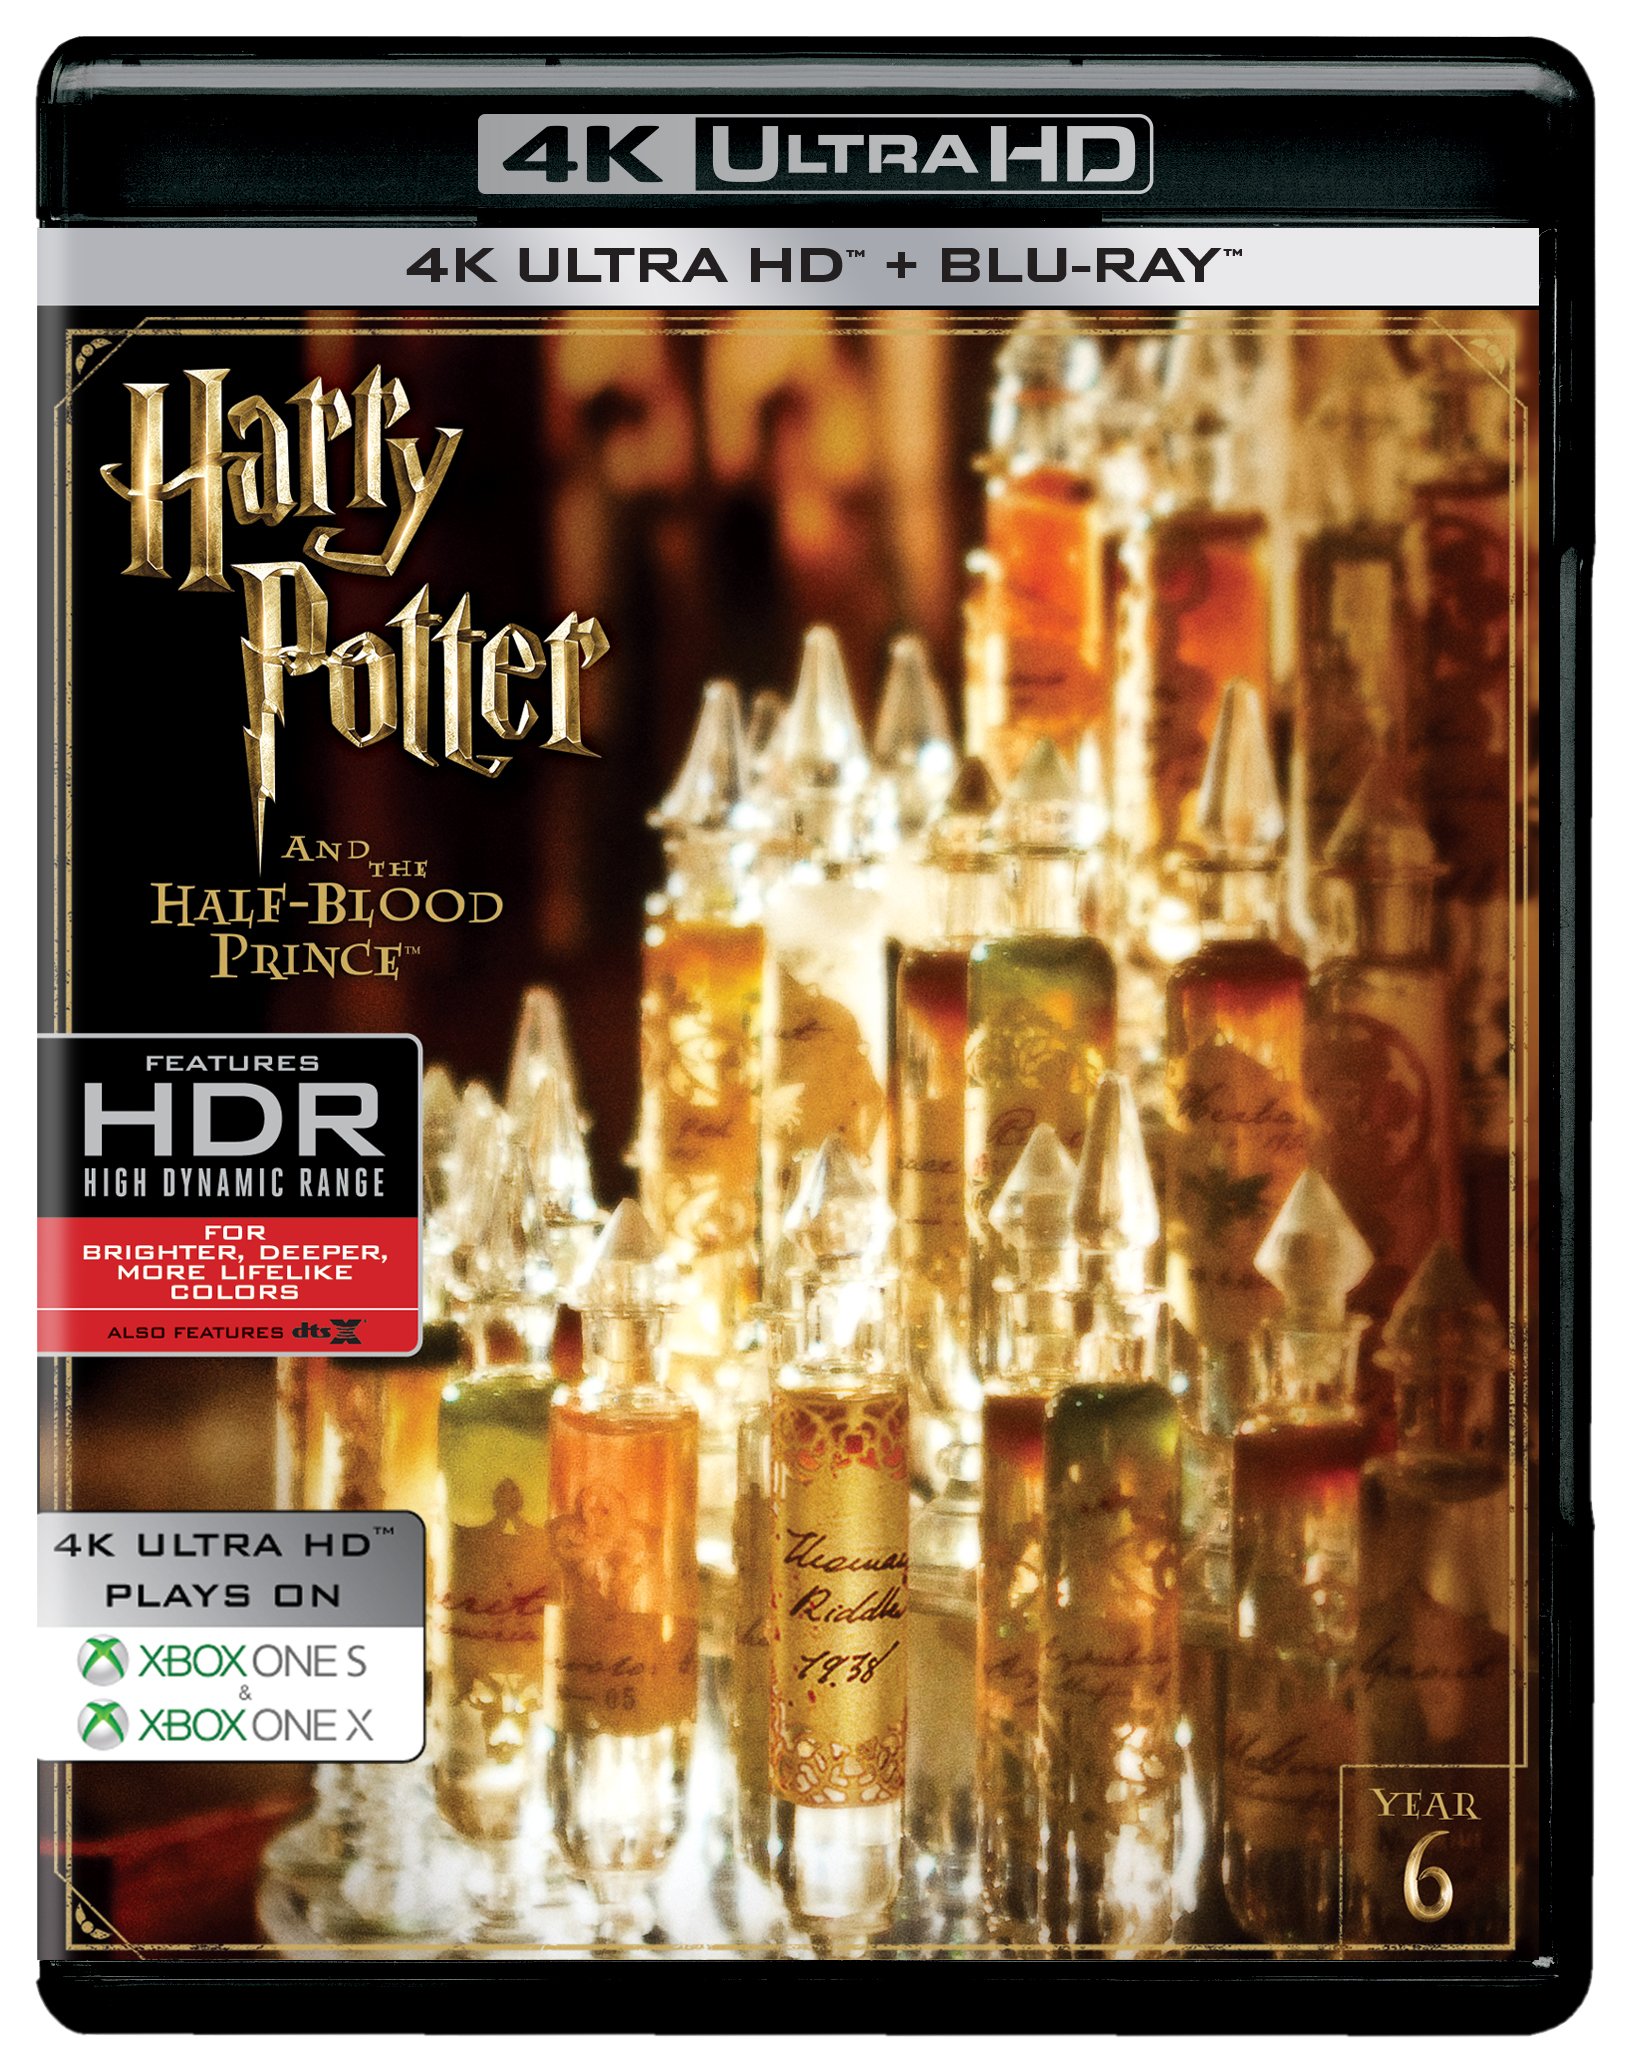 harry-potter-and-the-half-blood-prince-2009-year-6-4k-uhd-hd-2-disc